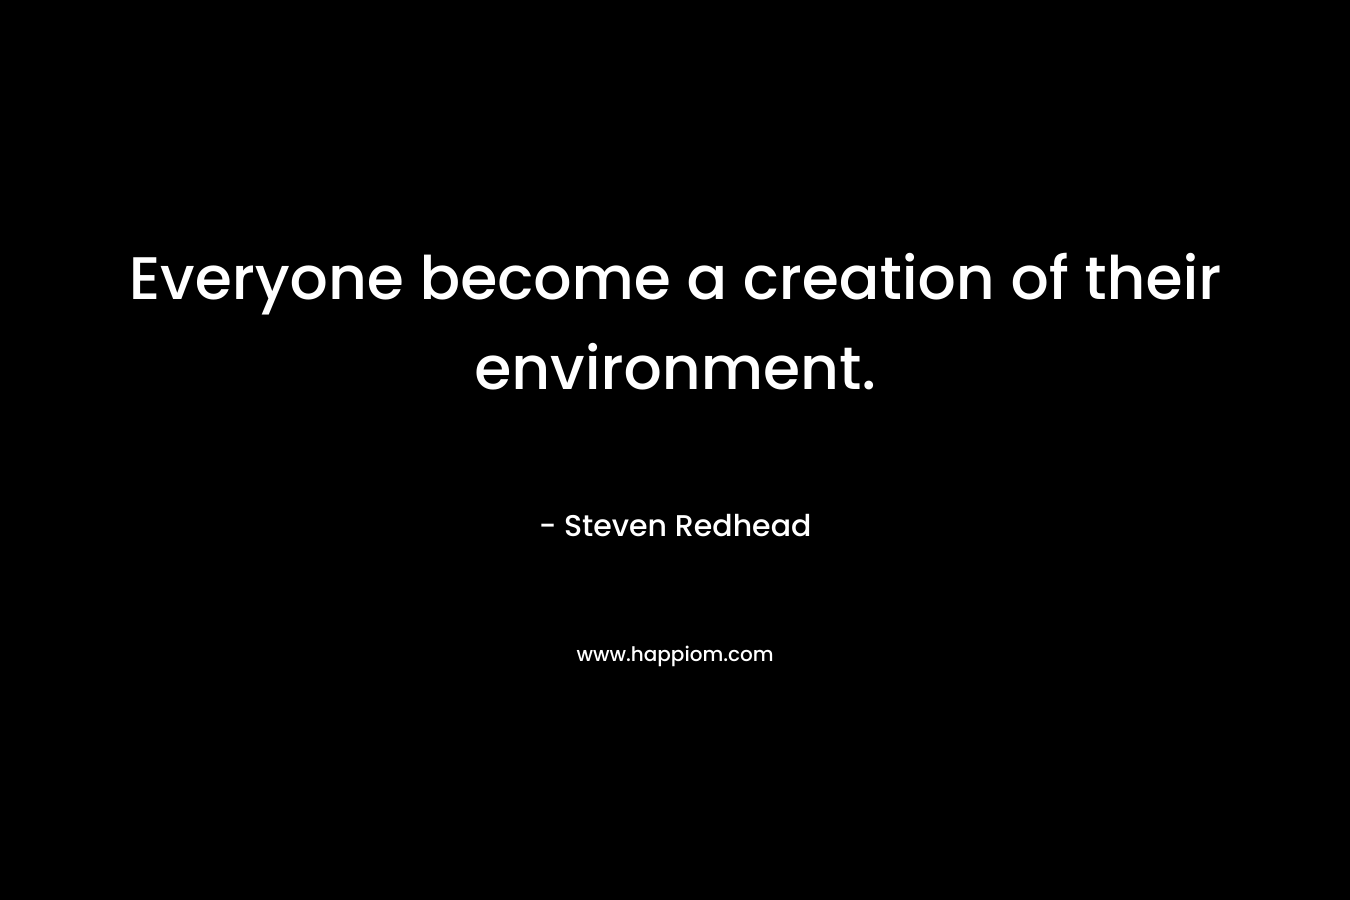 Everyone become a creation of their environment.